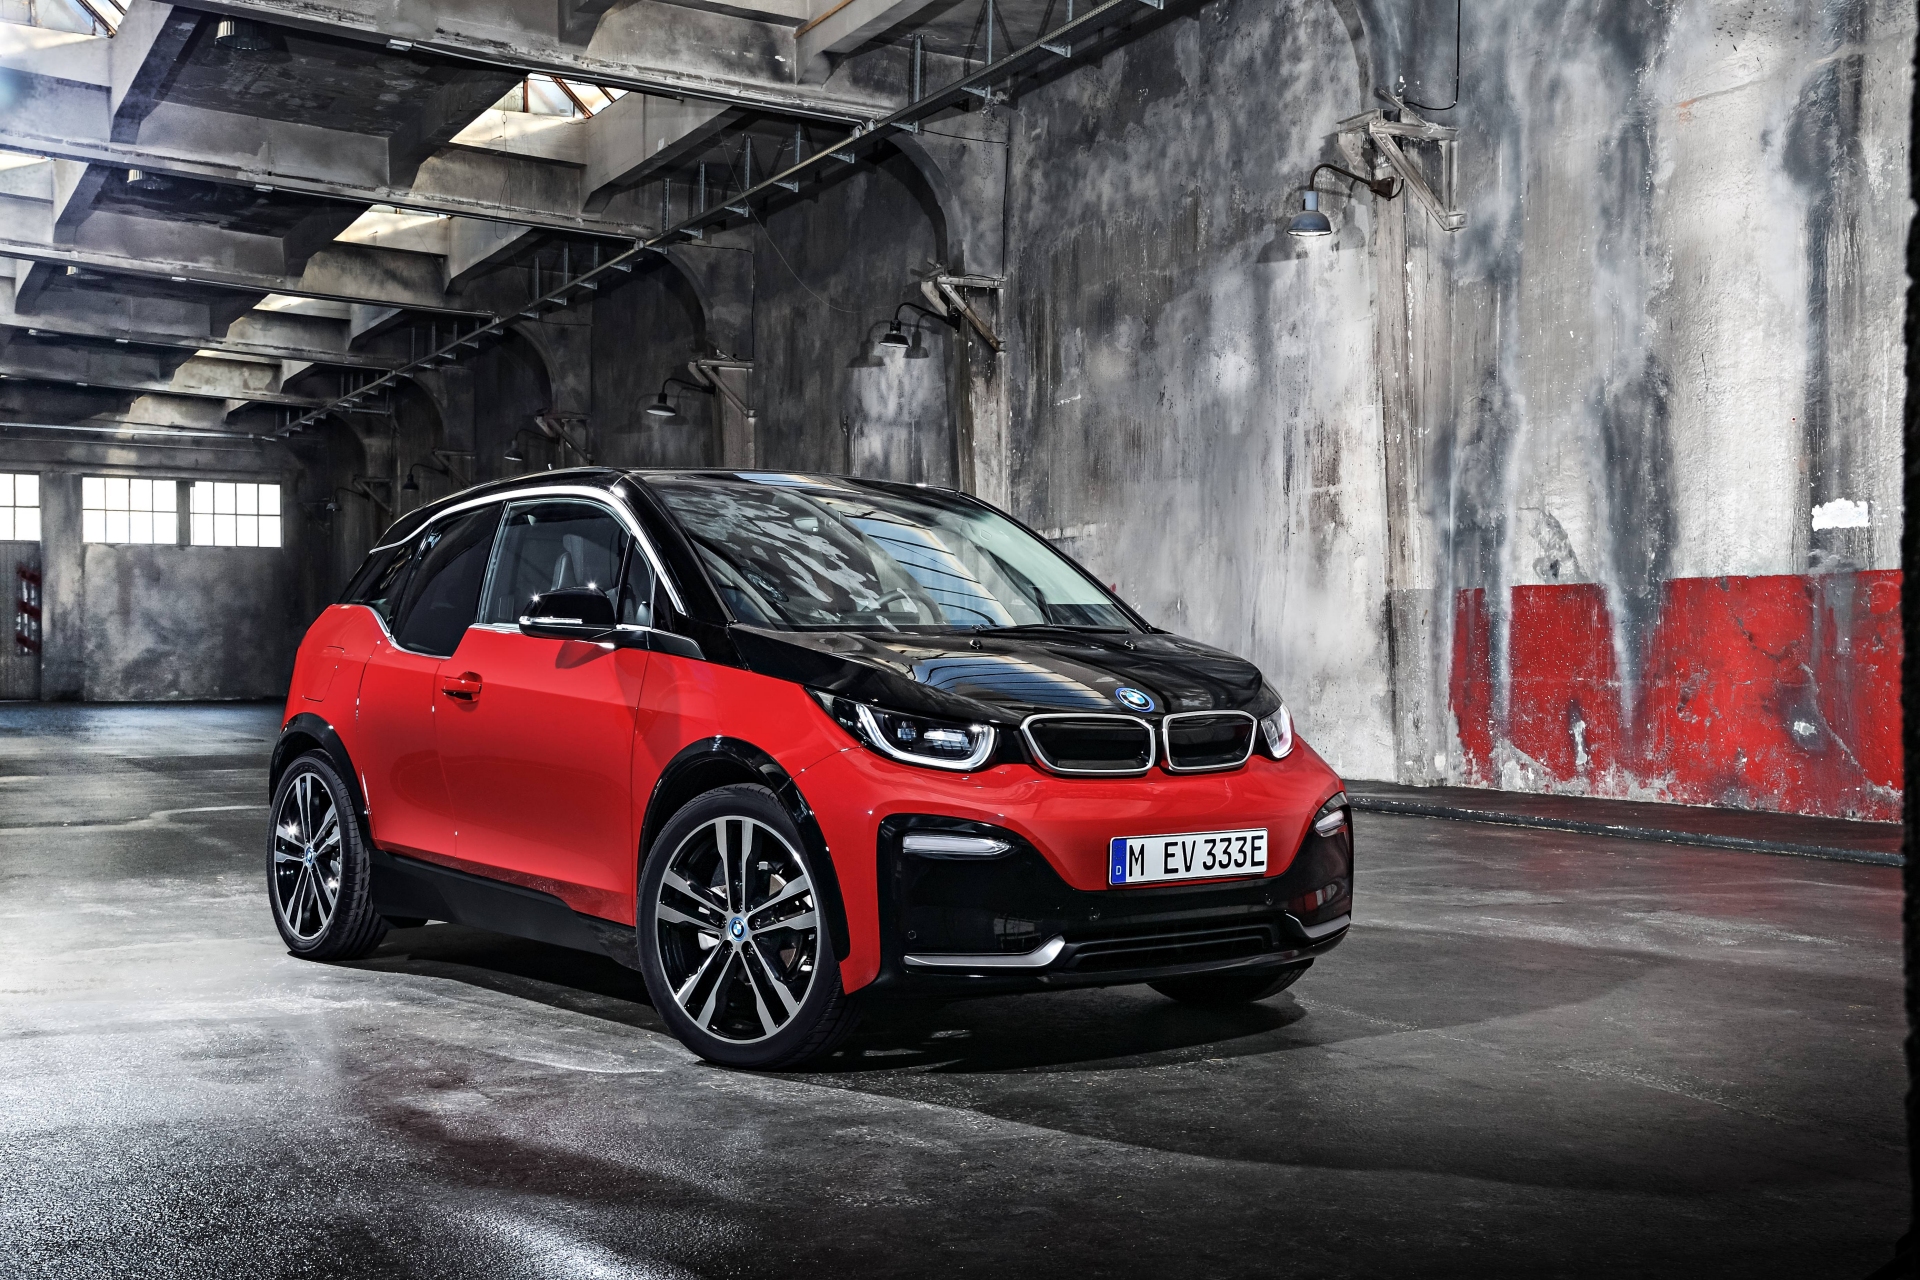 BMW i3 - Orange Exterior - Front Side View - Green Machine | A Closer Look At Electric Cars And Hybrid Vehicles